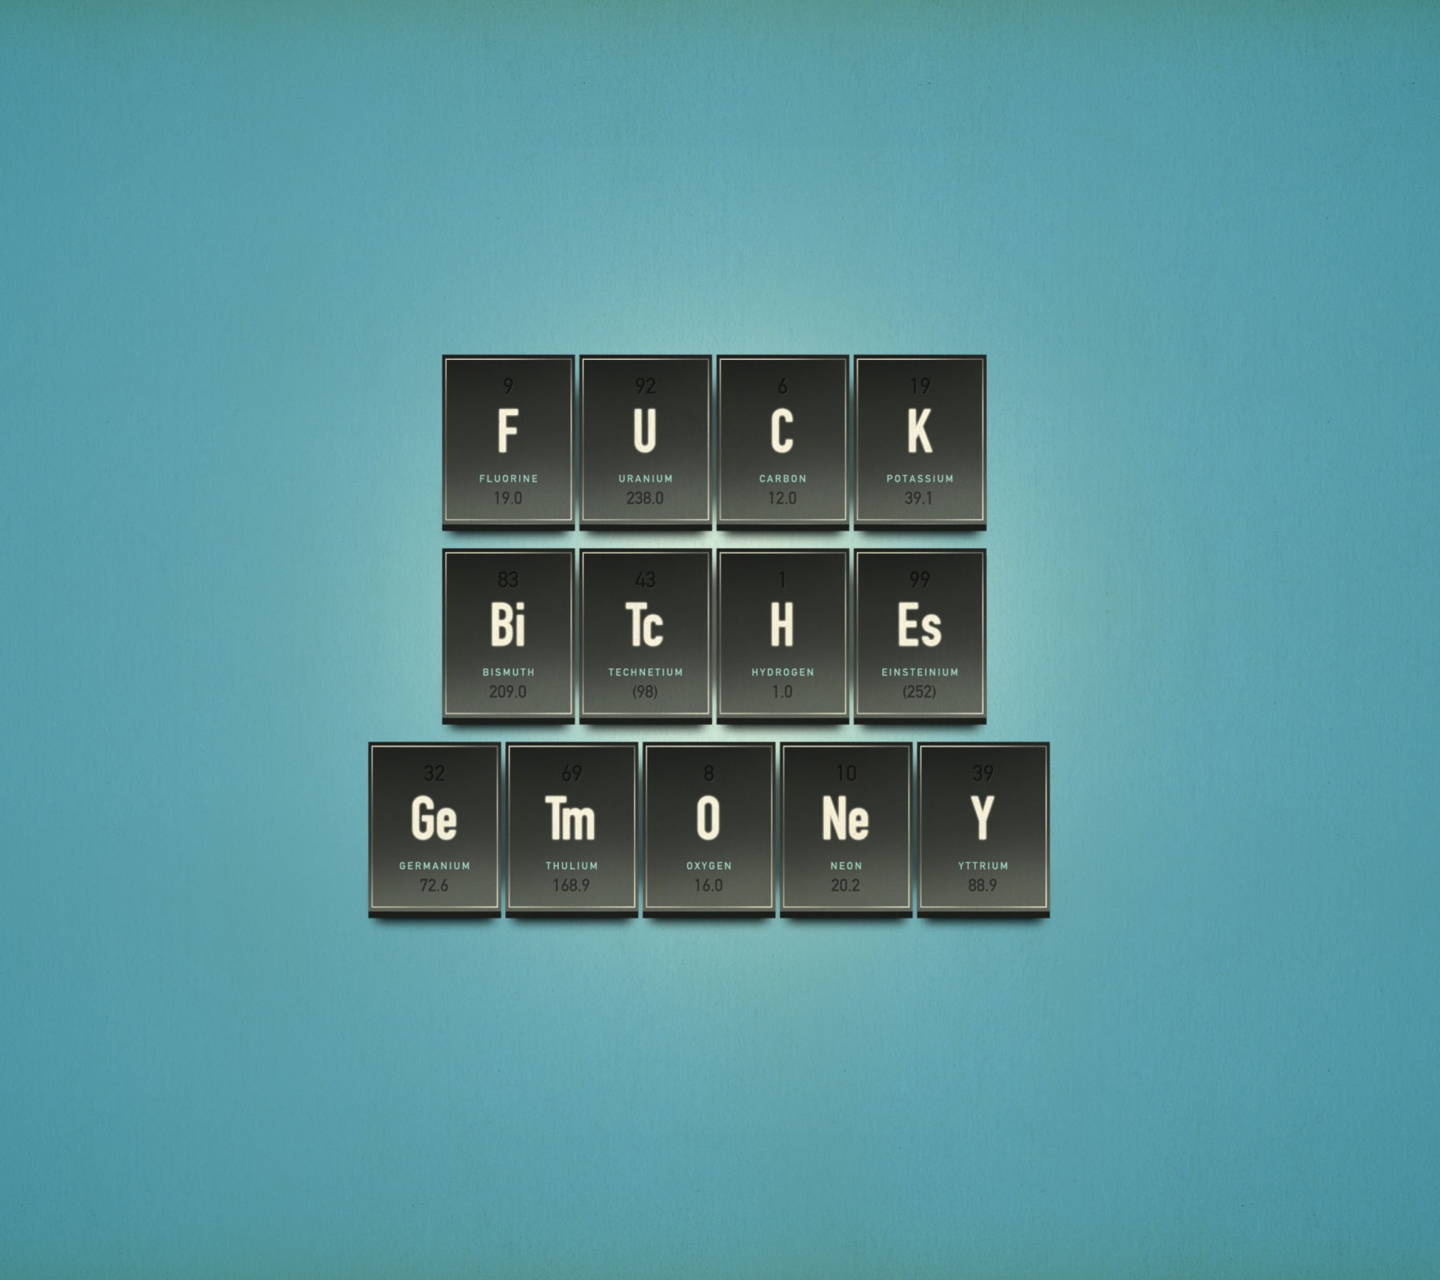 Funny Chemistry Periodic Table screenshot #1 1440x1280